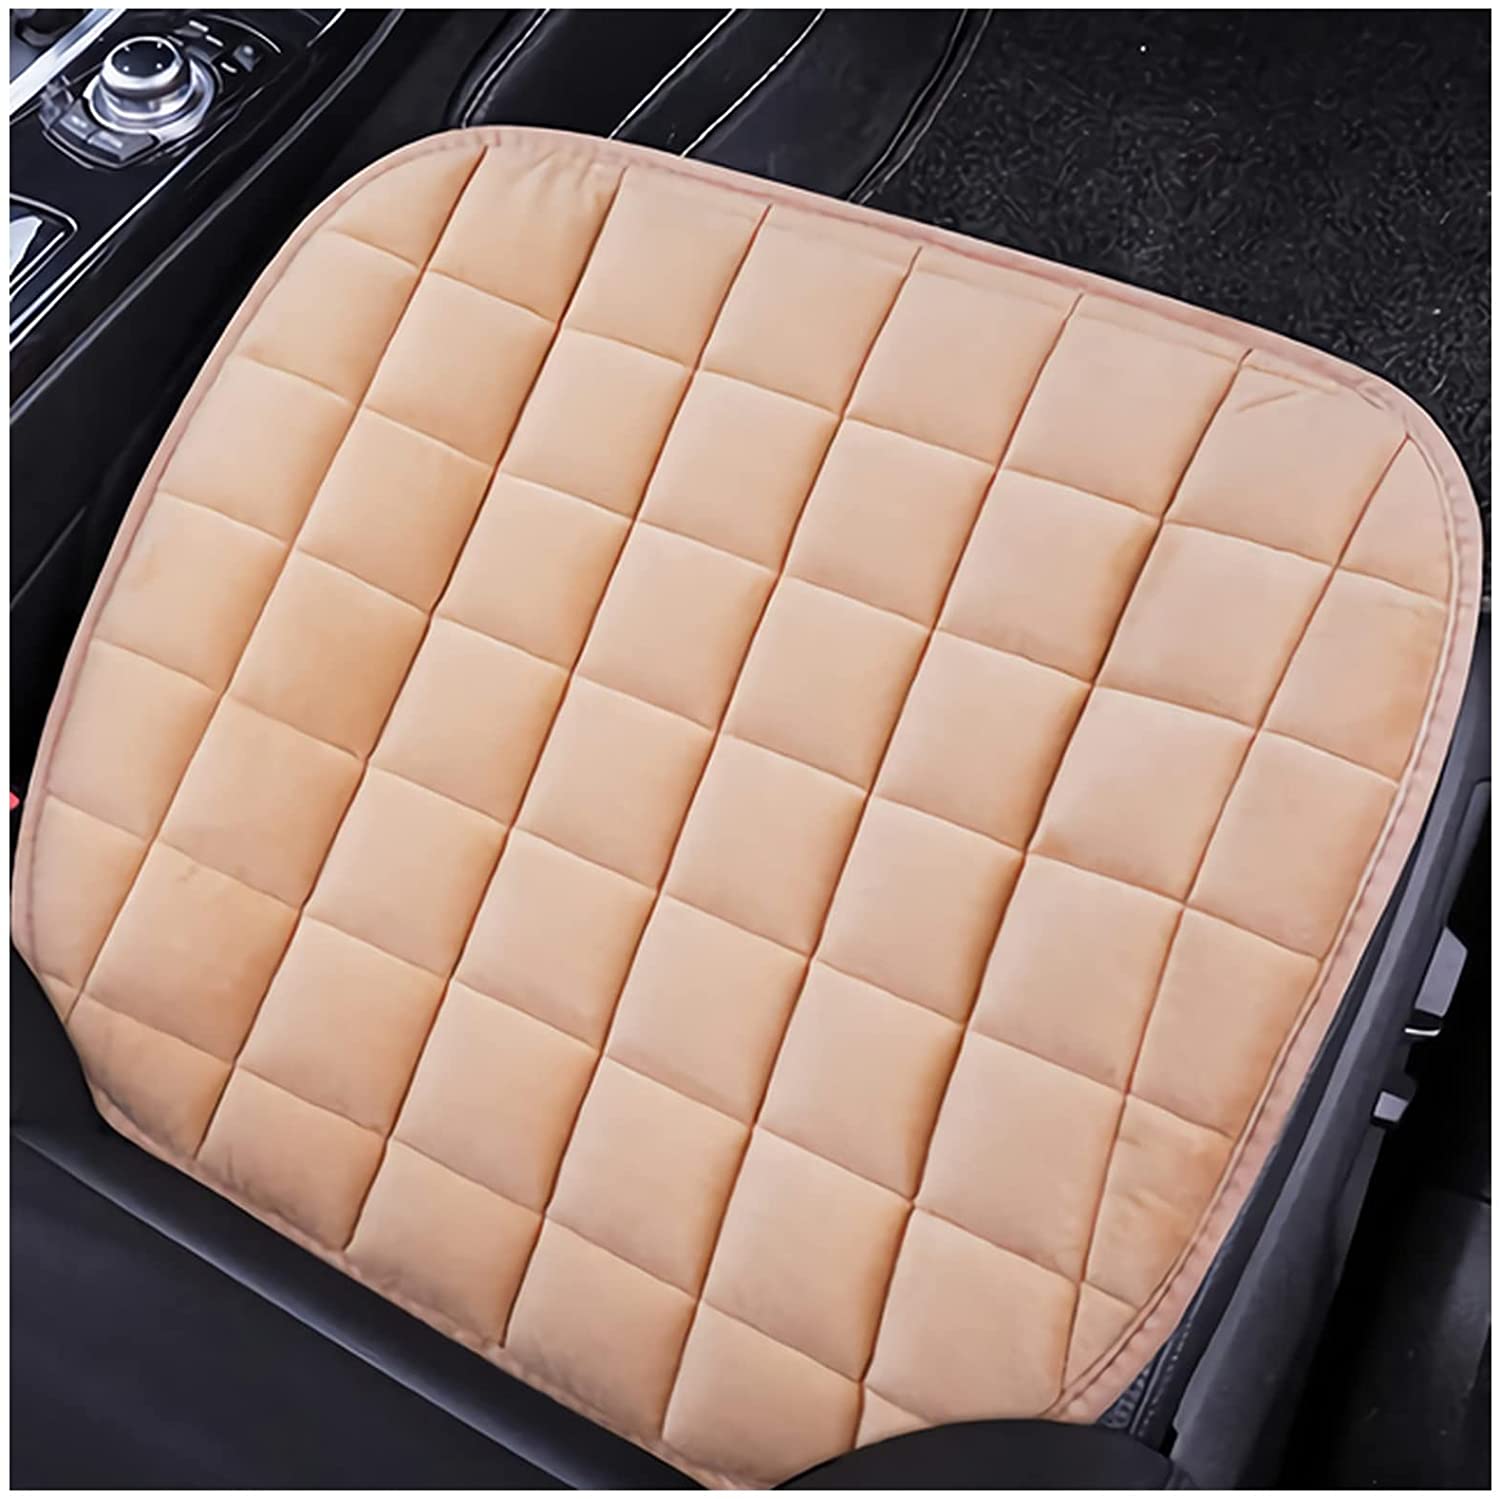 bamutech Seat Cushion Car Seat Cover Fit Truck SUV Van Front Rear Flake Cloth Cushion Non-Slip Winter Car Protector Mat Pad Keep Warm Universal Seat Cushion Chair (Size : Beige Front 1)